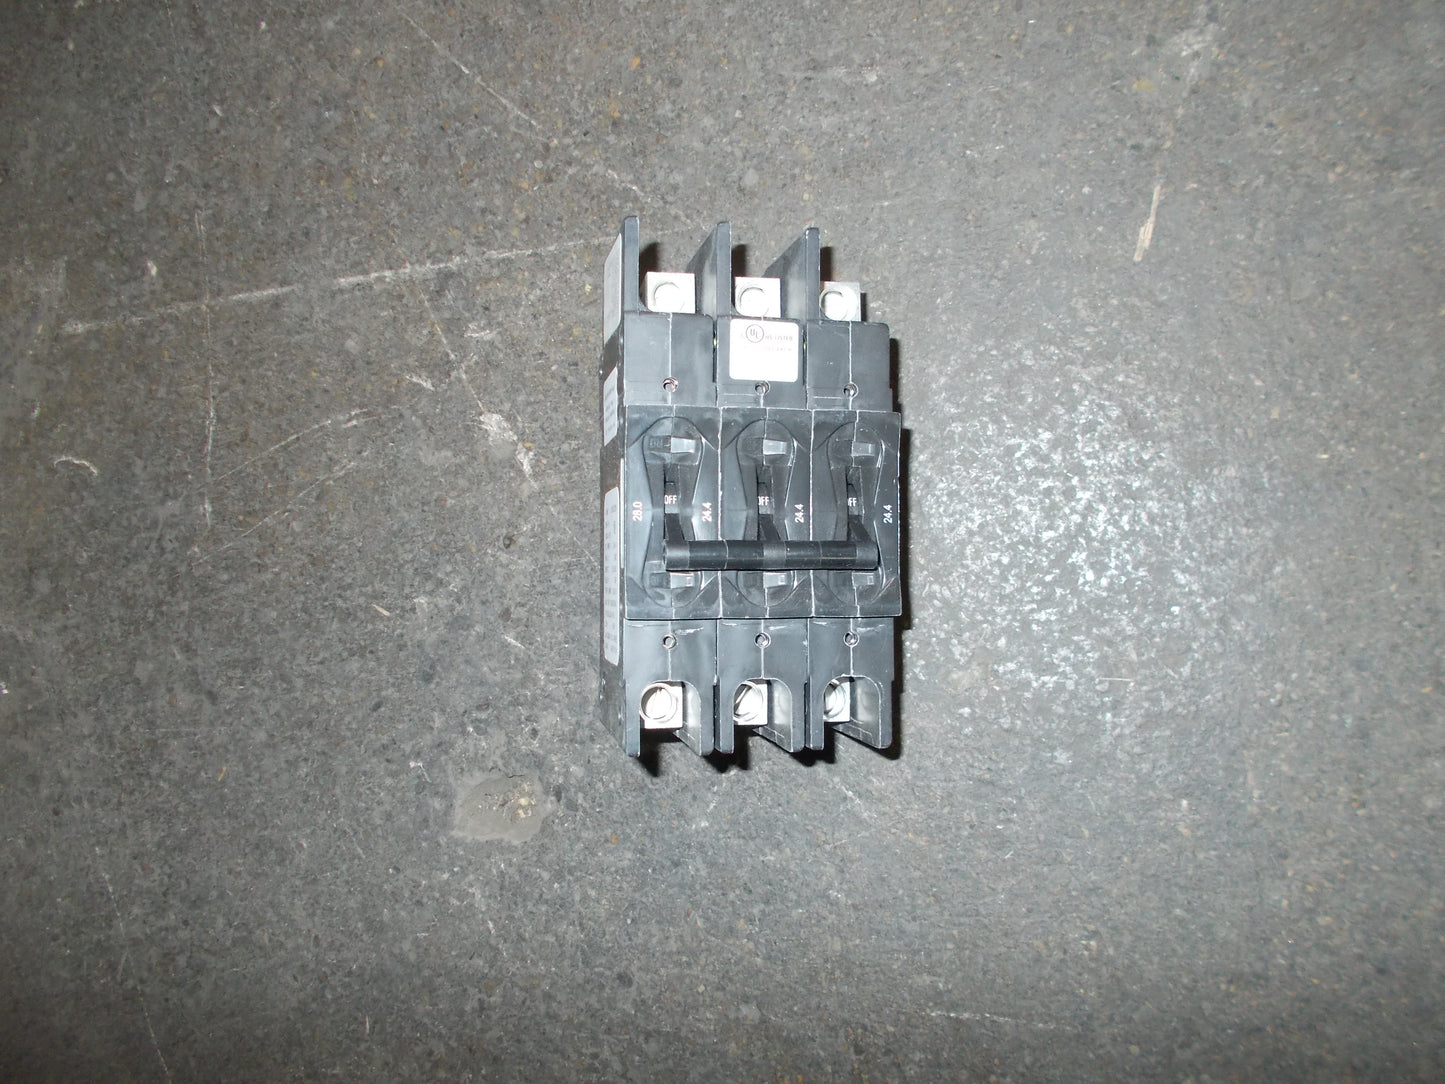 3 POLE 24.4 AMP "209 MULTI-POLE" SERIES HYDRAULIC MAGNETIC CIRCUIT BREAKER PROTECTOR 240/50-60/1 OR 3